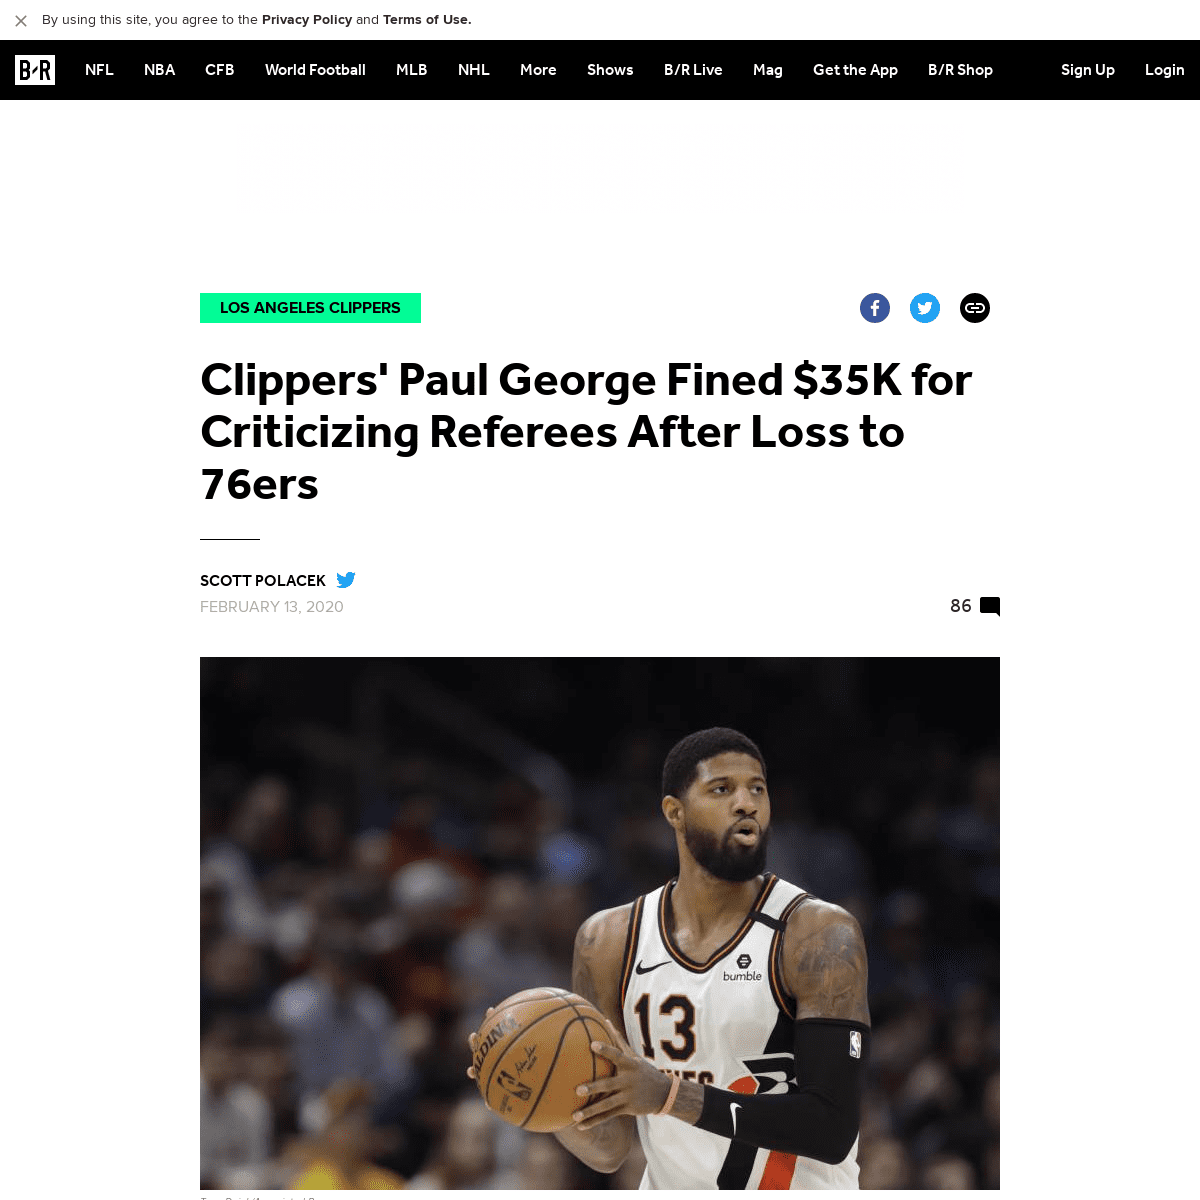 A complete backup of bleacherreport.com/articles/2876176-clippers-paul-george-fined-35k-for-criticizing-referees-after-loss-to-7